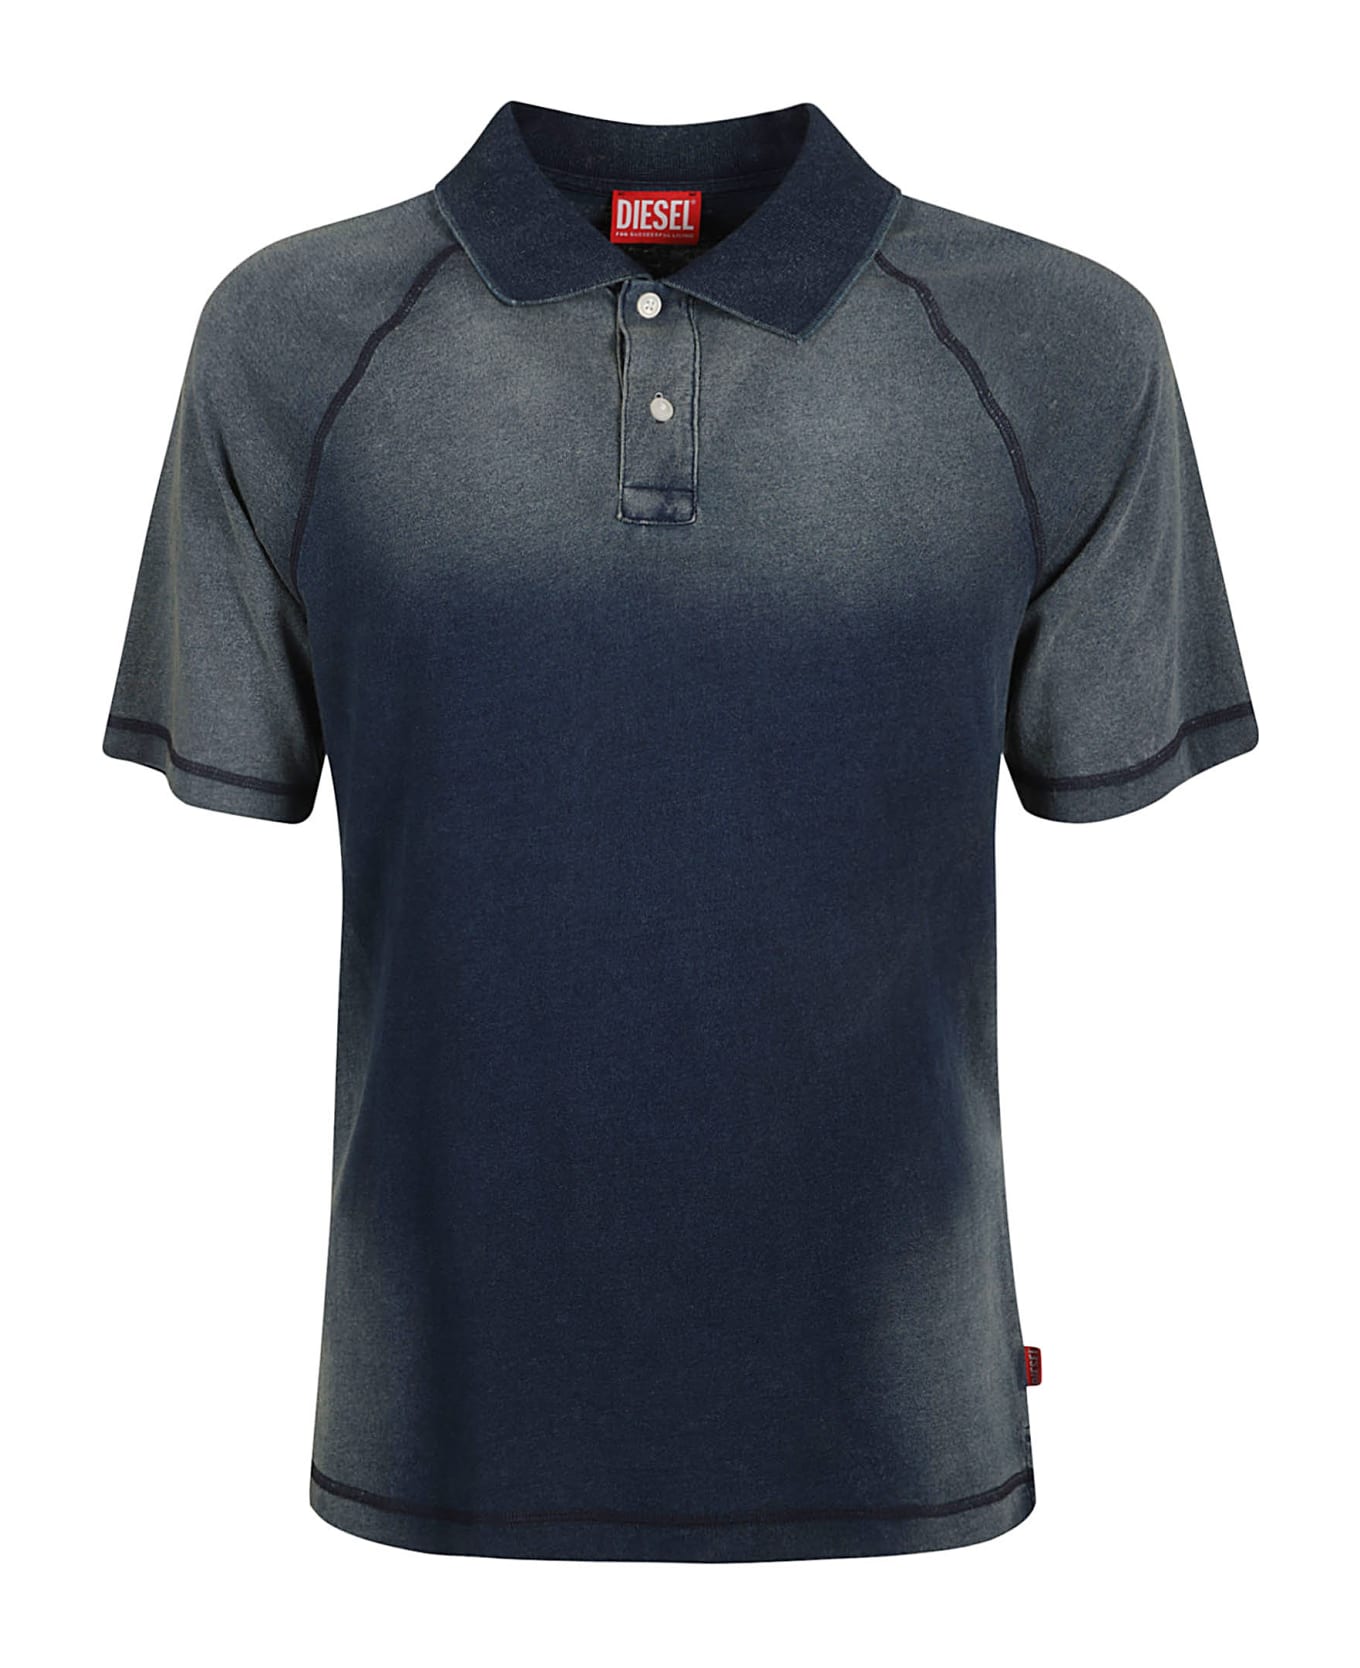 Diesel Classic Fitted Polo Shirt - Non definito シャツ